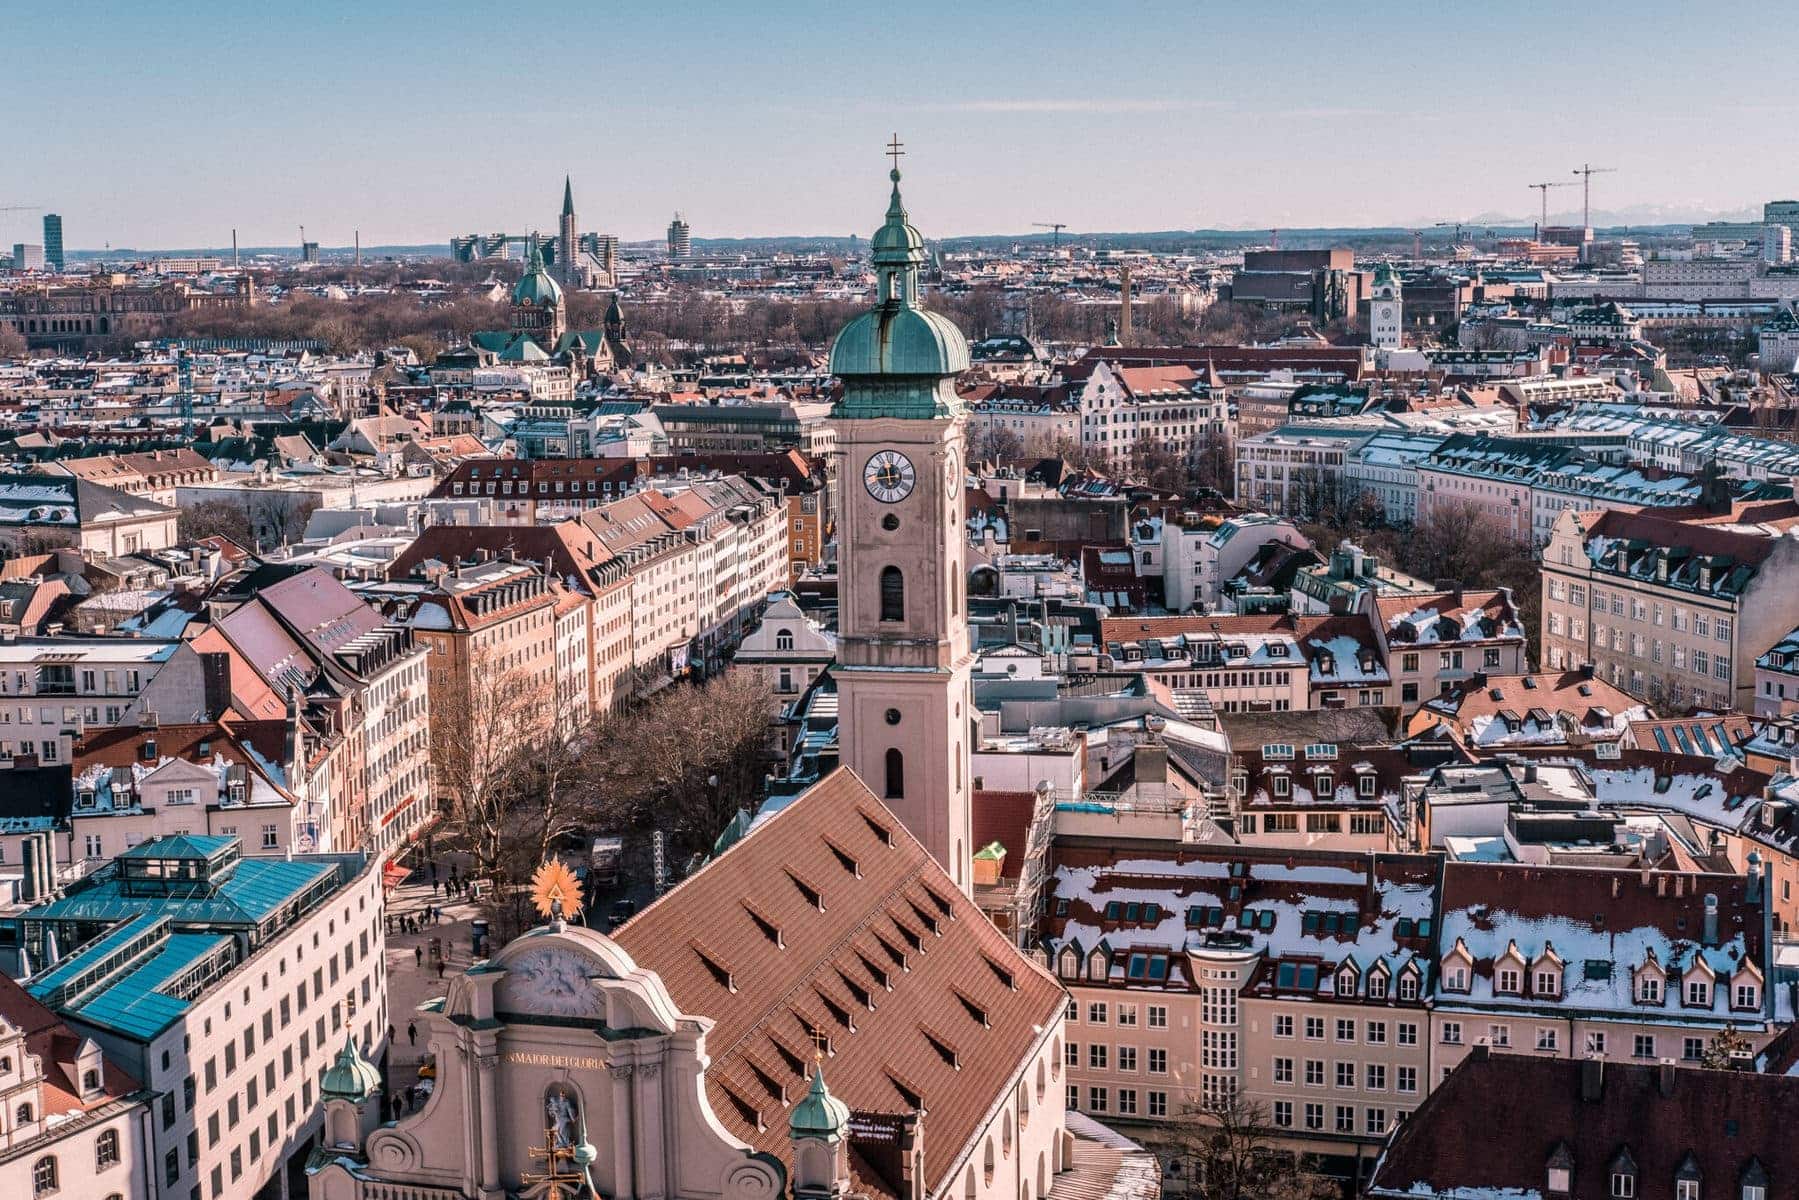 View from the Peterskirche in Munich